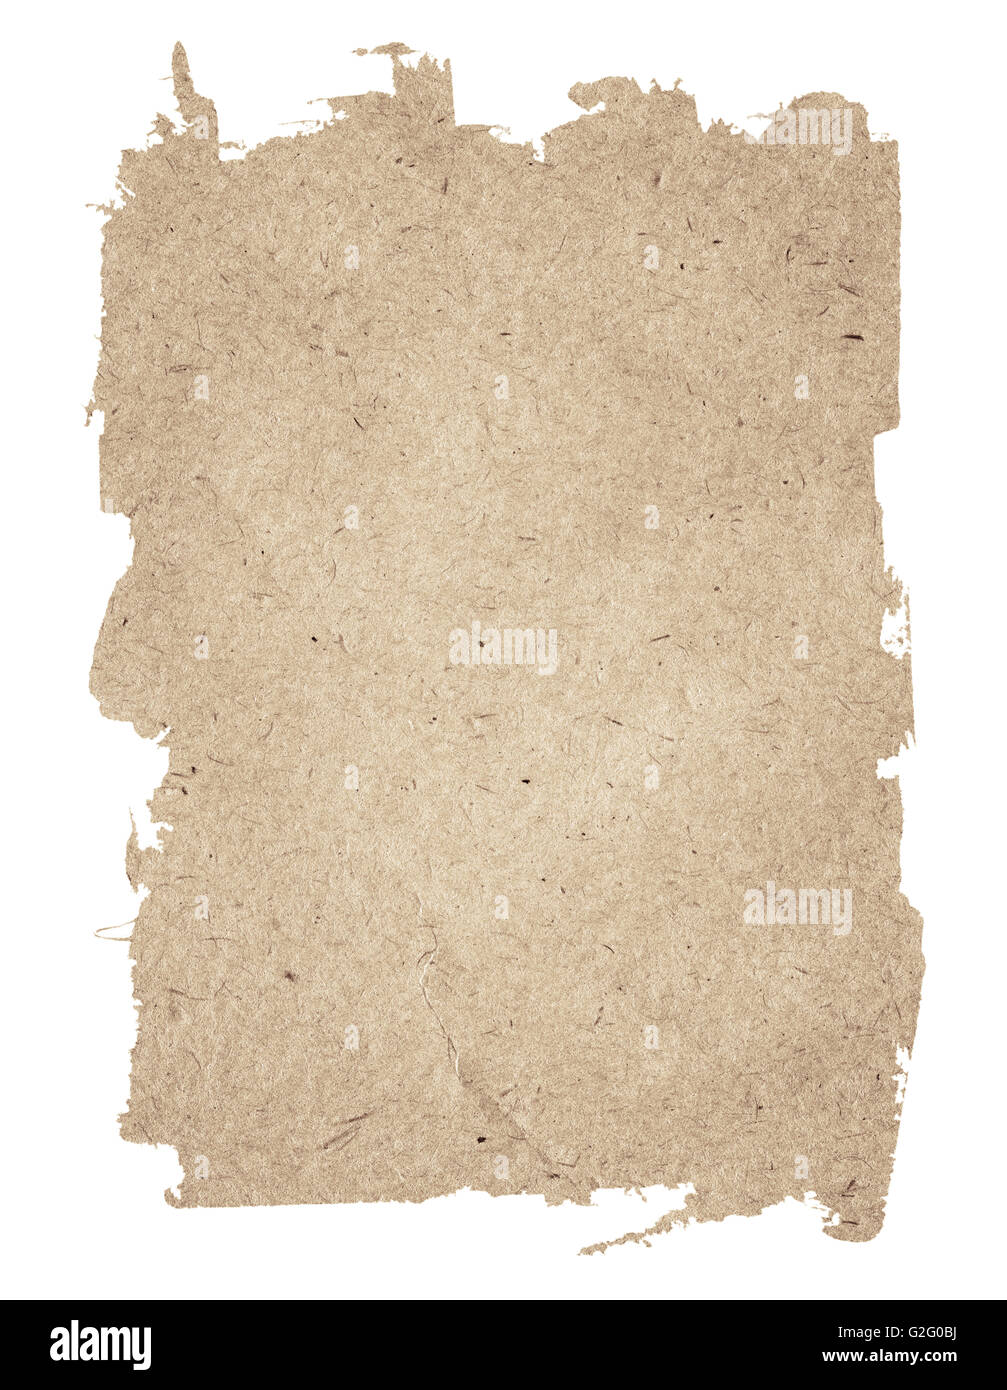 Brown torn grunge paper texture isolated on white background Stock Photo